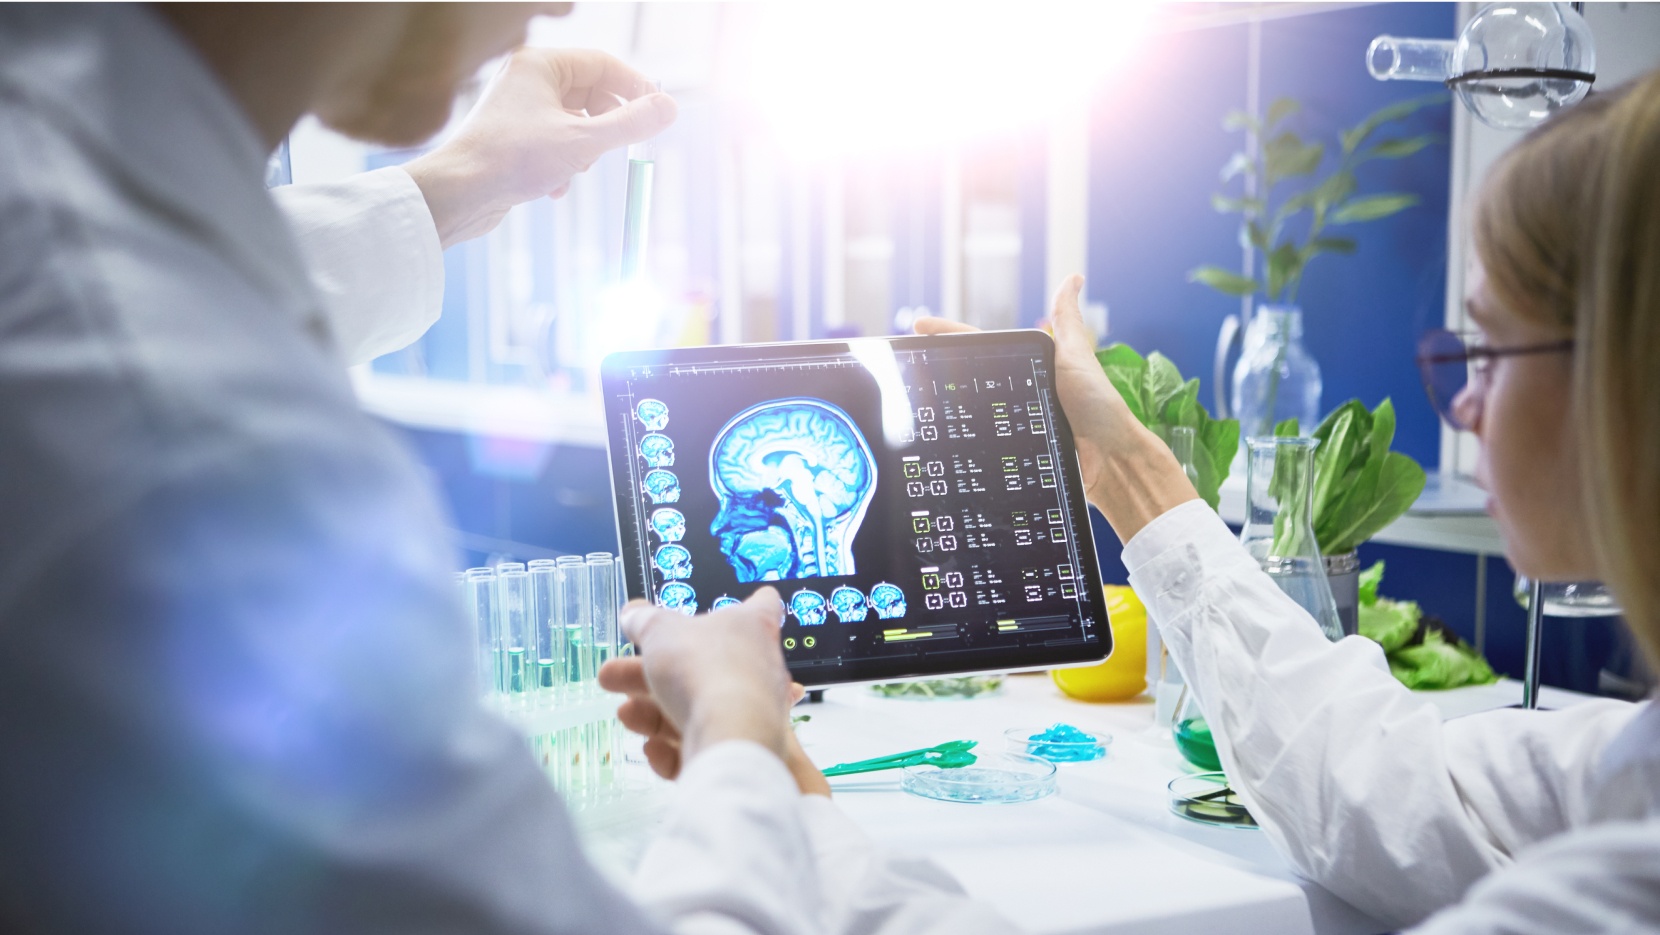 Close up photo of two doctors male and female working in laboratory holding digital tablet and analysing mri scan image.